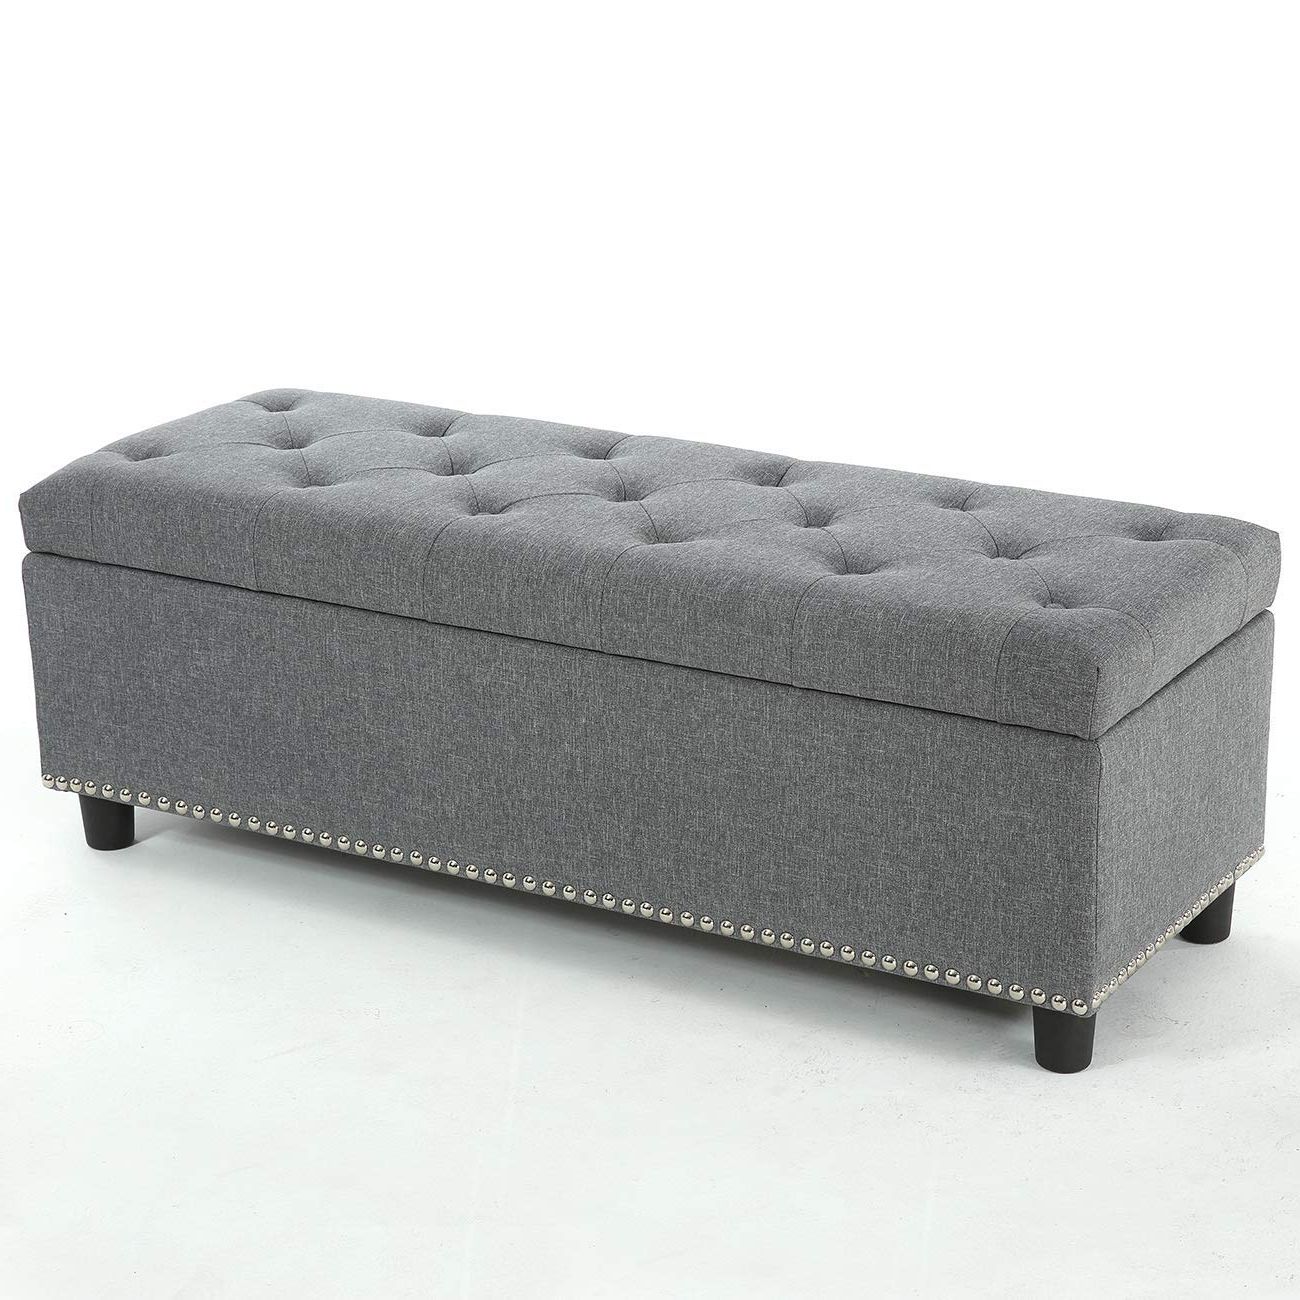 Rectangular Gray Storage Fabric Ottoman Bench Tufted Footrest Lift Top For Fashionable Fabric Tufted Storage Ottomans (View 7 of 10)